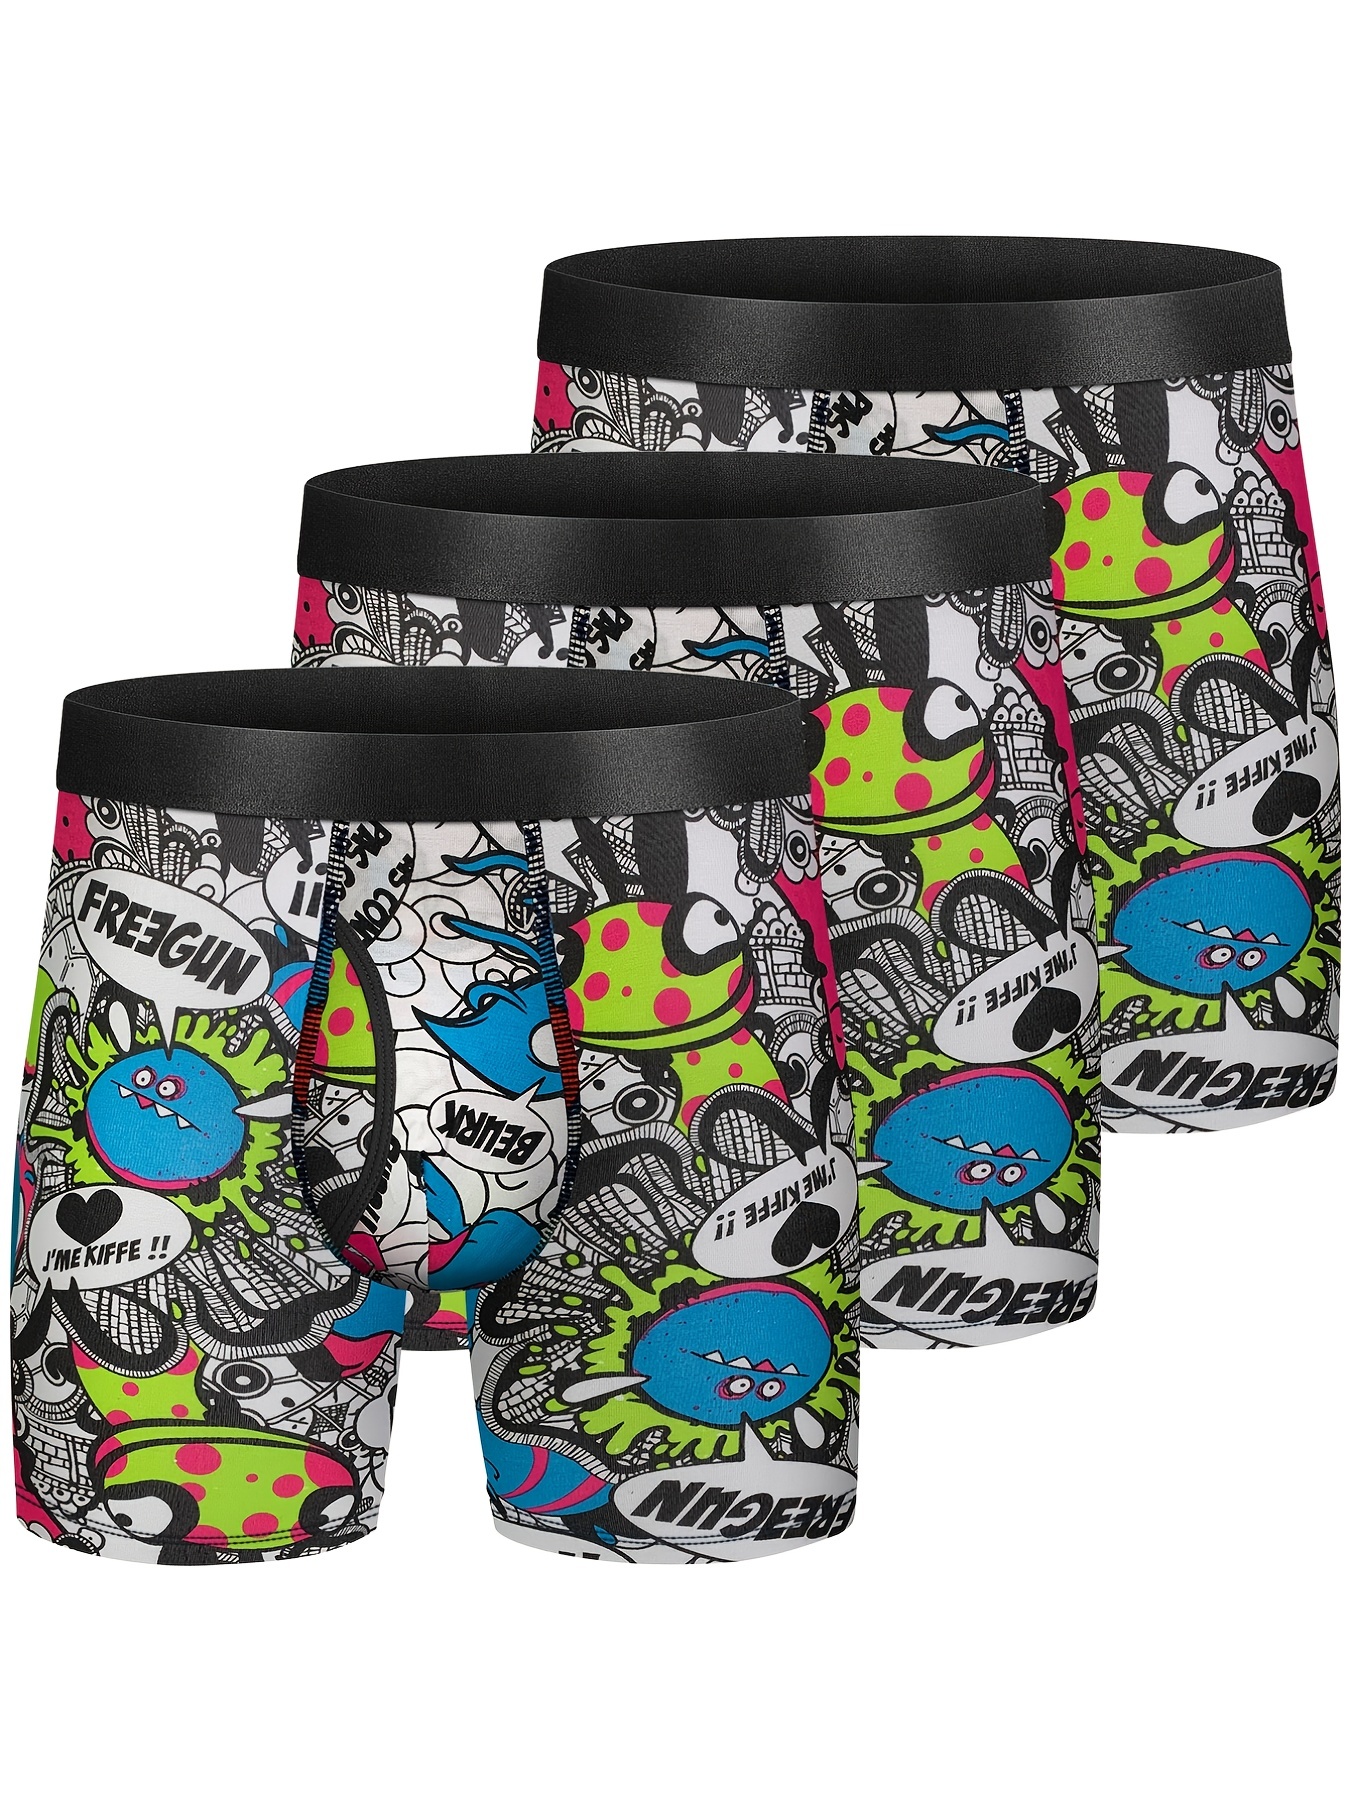 Land of the Dino Boxer Brief Underwear - Sock It to Me